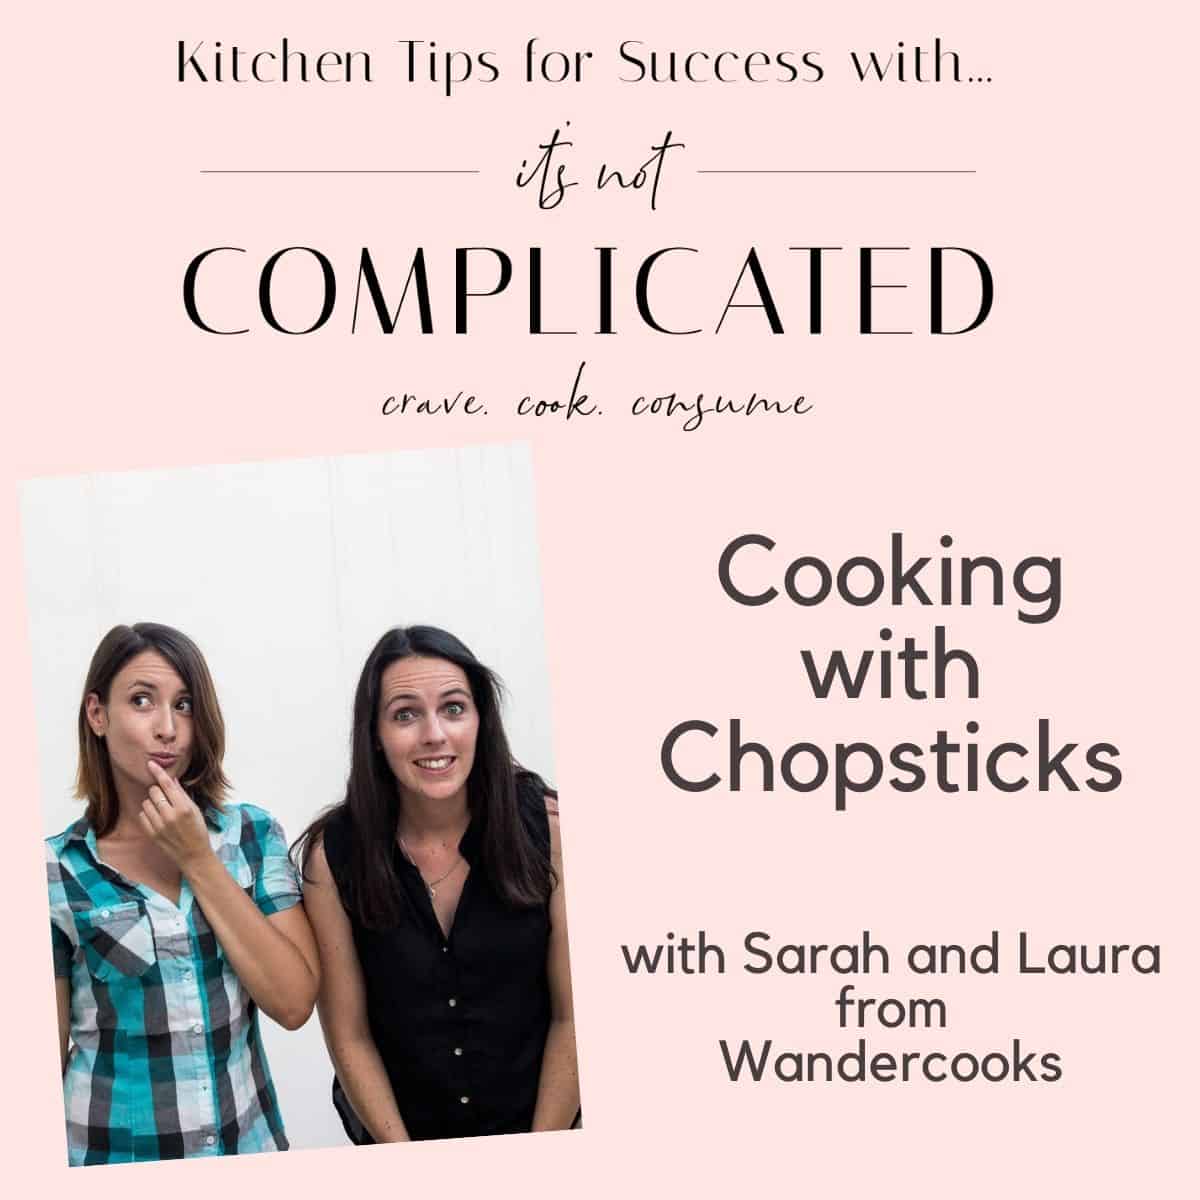 Cooking with Chopsticks - It's Not Complicated Recipes